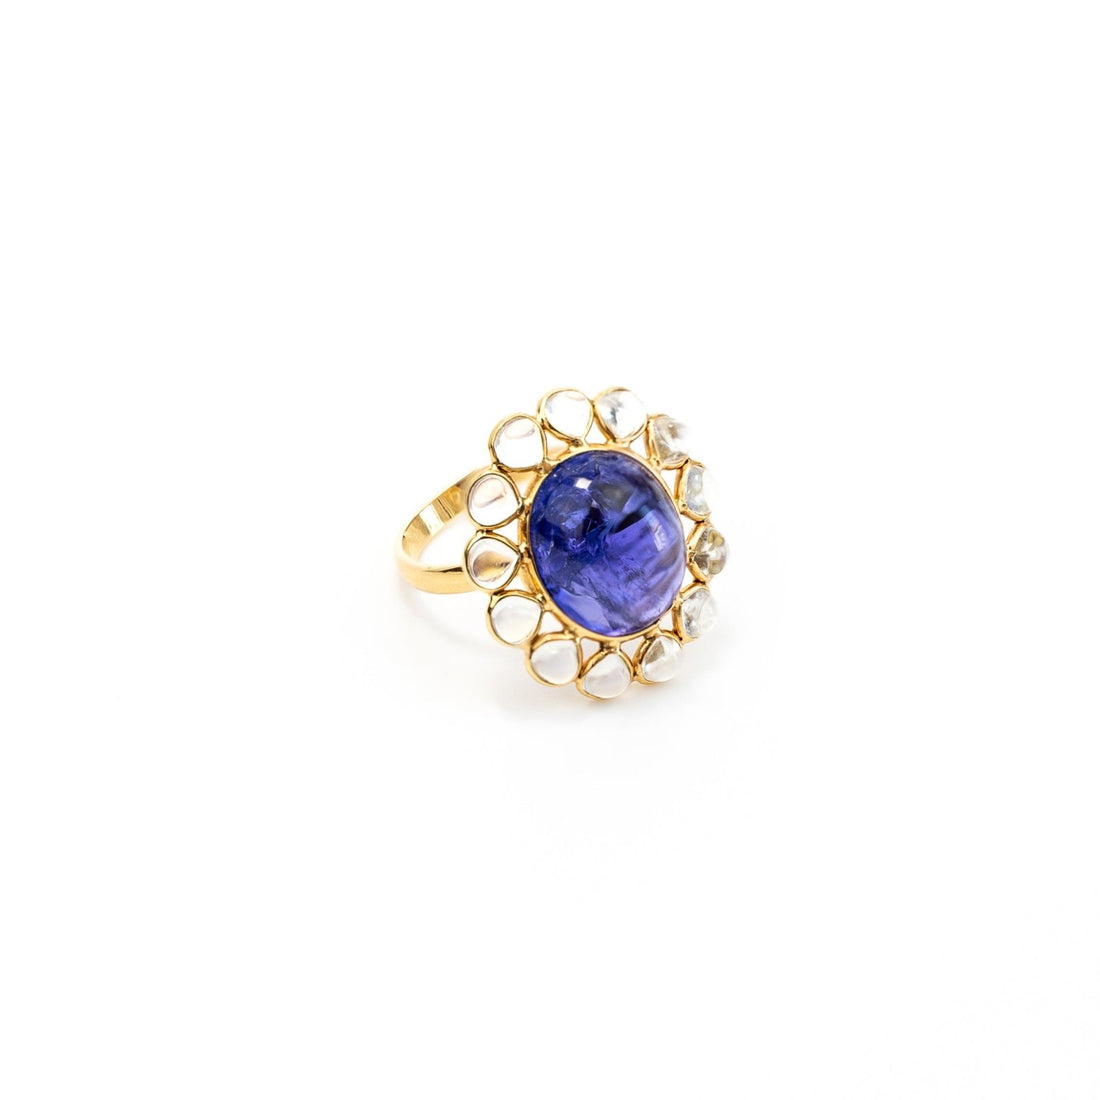 One of a Kind Moonstone and Tanzanite Ring - Ele Keats Jewelry